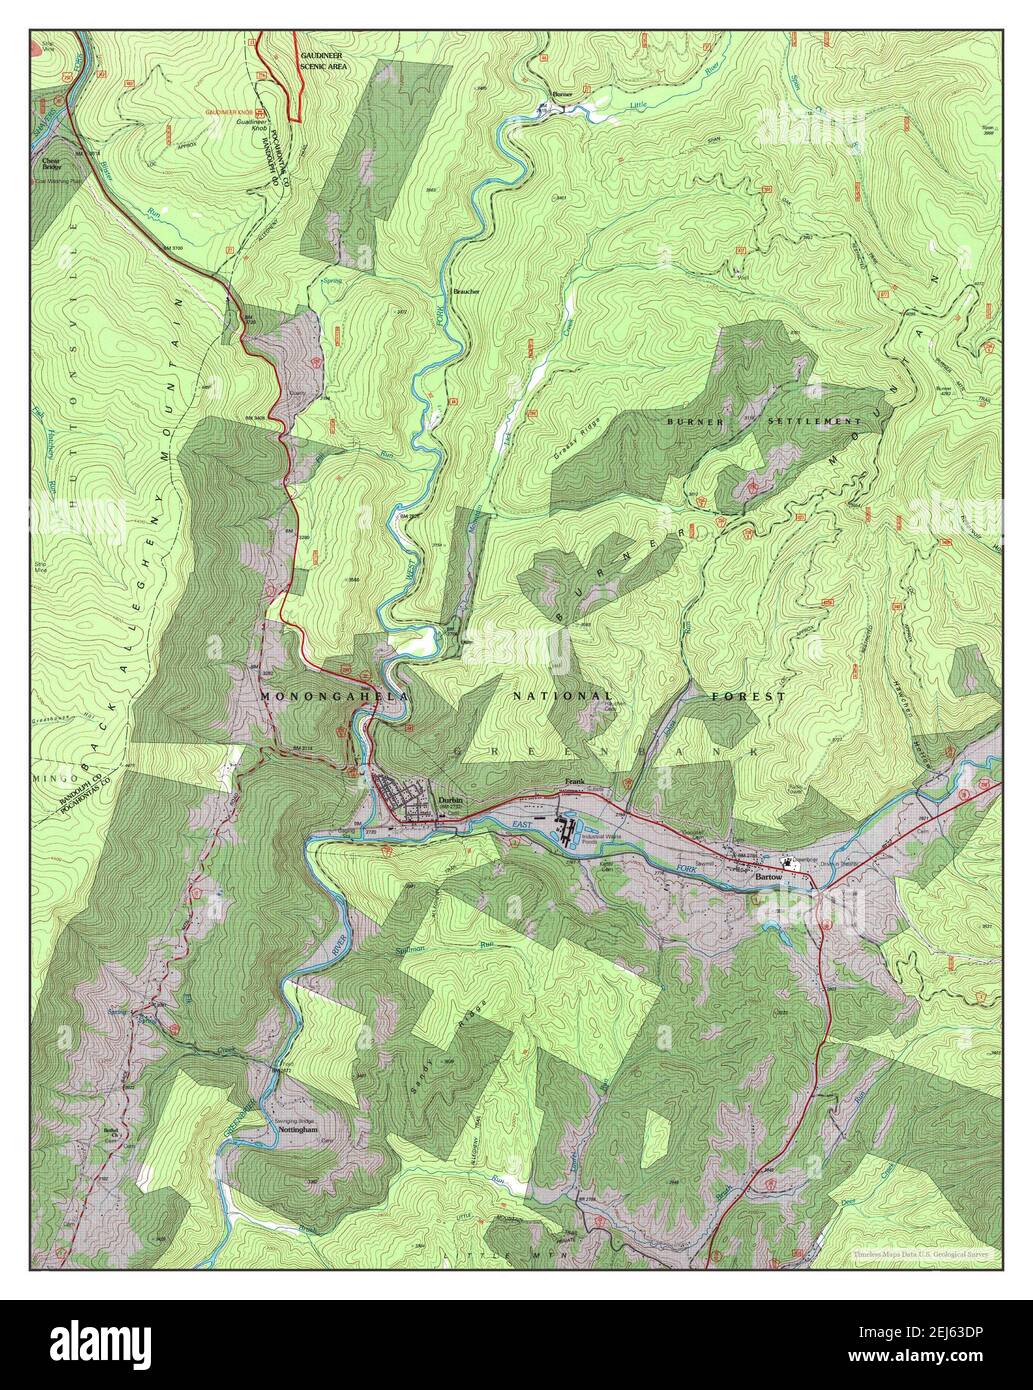 Durbin, West Virginia, map 1995, 1:24000, United States of America by Timeless Maps, data U.S. Geological Survey Stock Photo